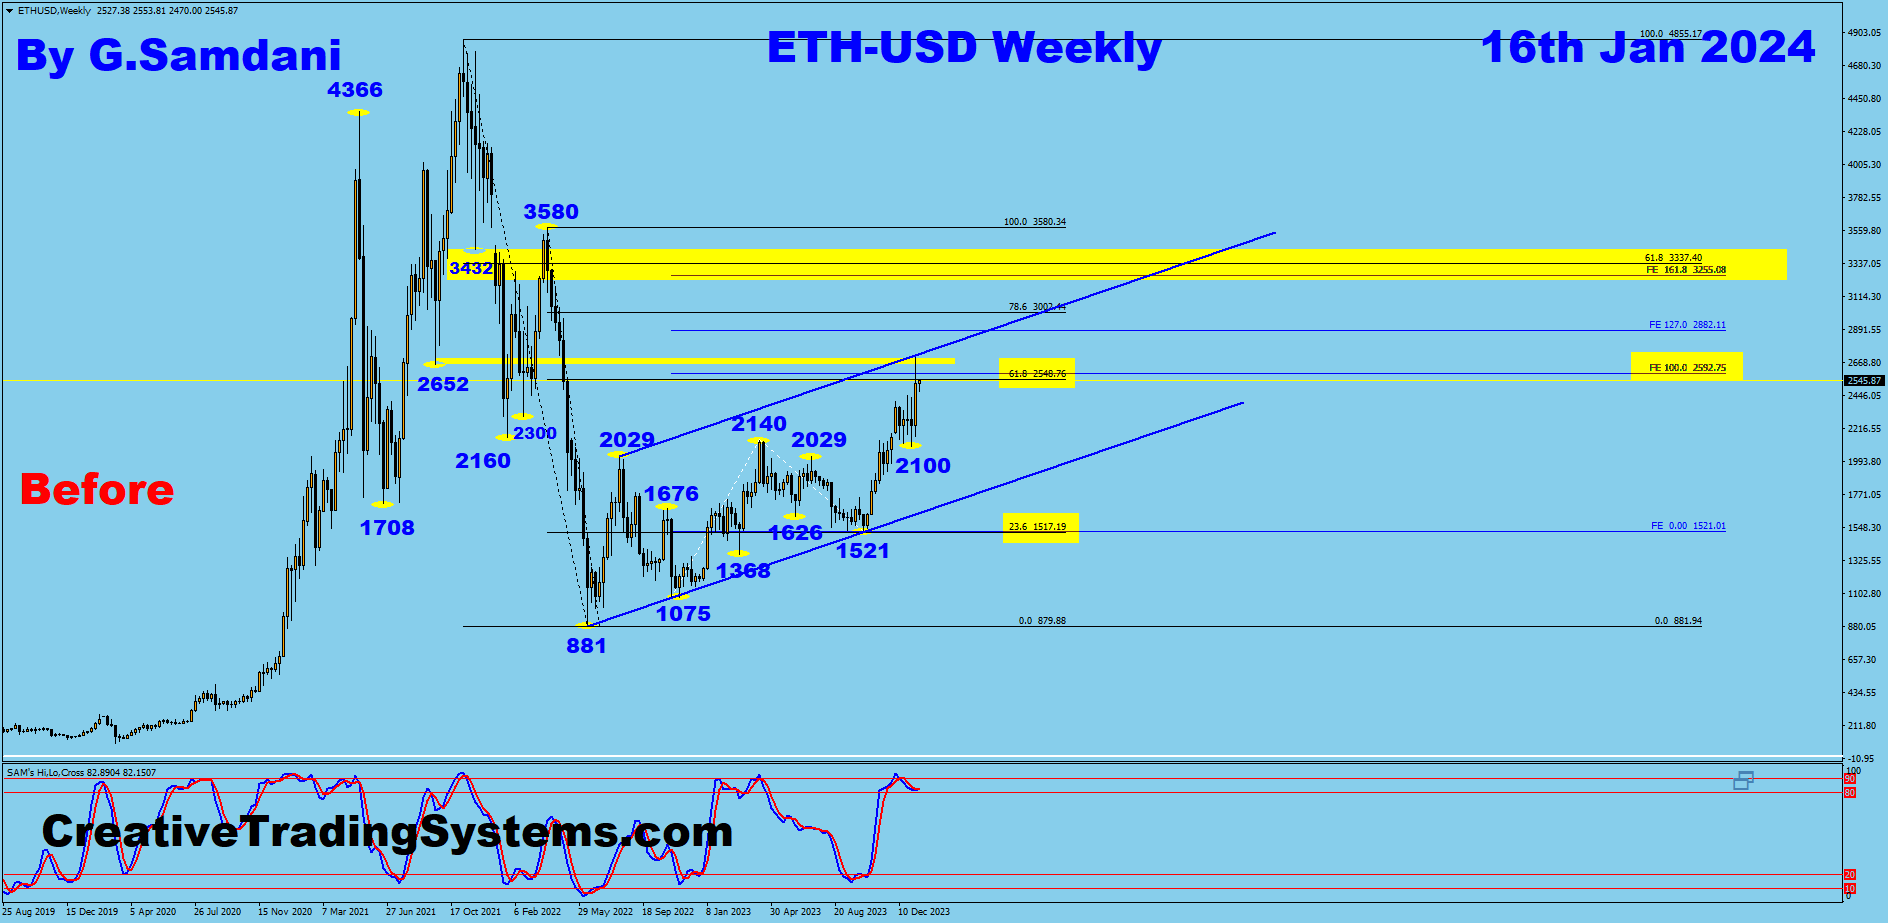 ETH-USD Weekly Chart. Going For Target Around 3300+